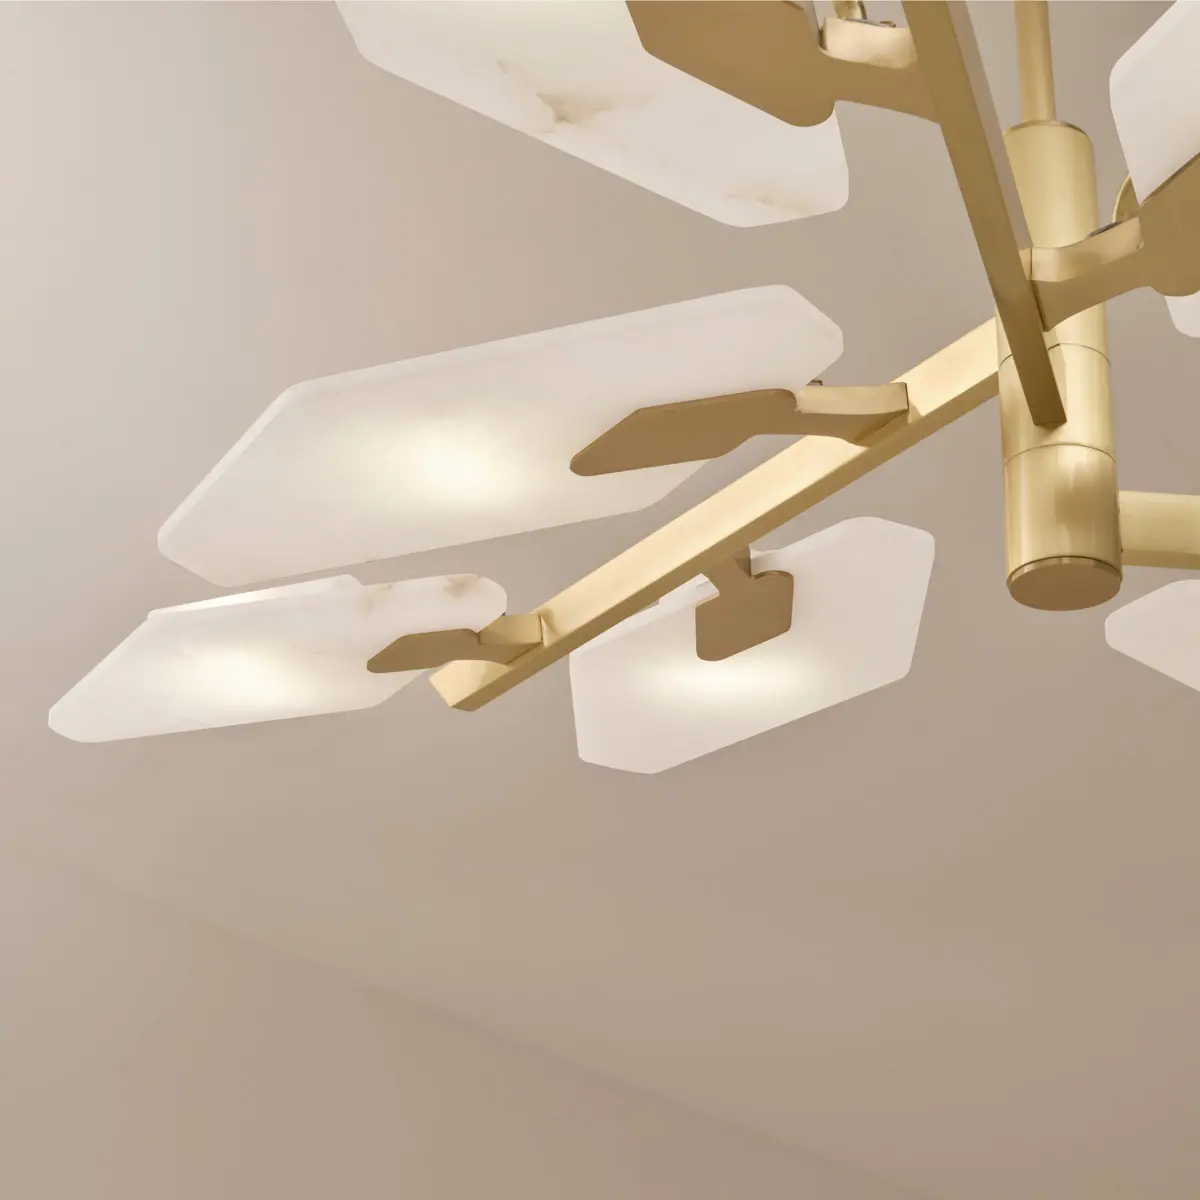 Leaf Ceiling Light by Gaspare Asaro